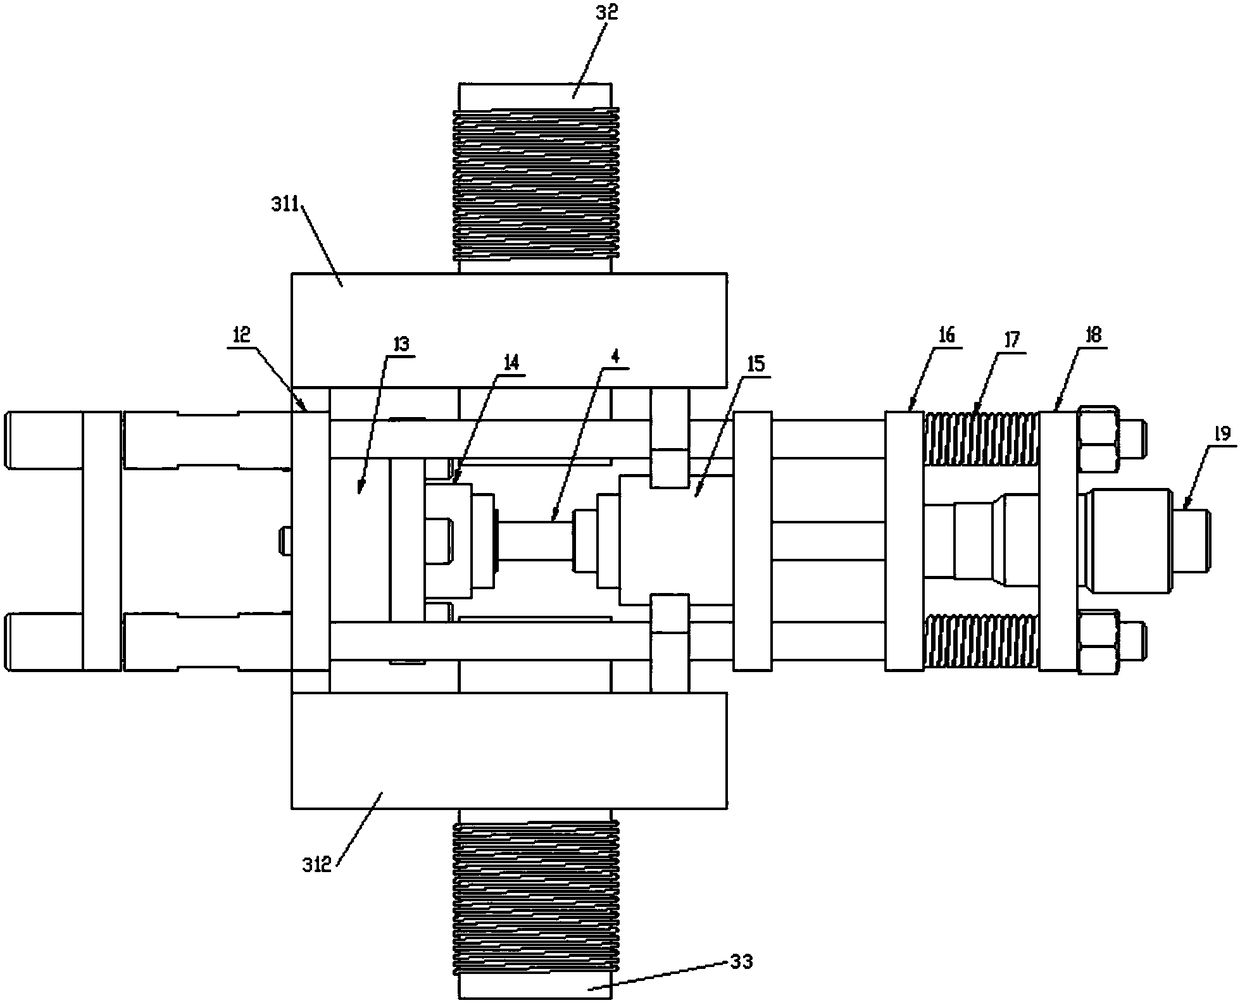 Portable in-situ multi-field coupling loading device for neutron scattering